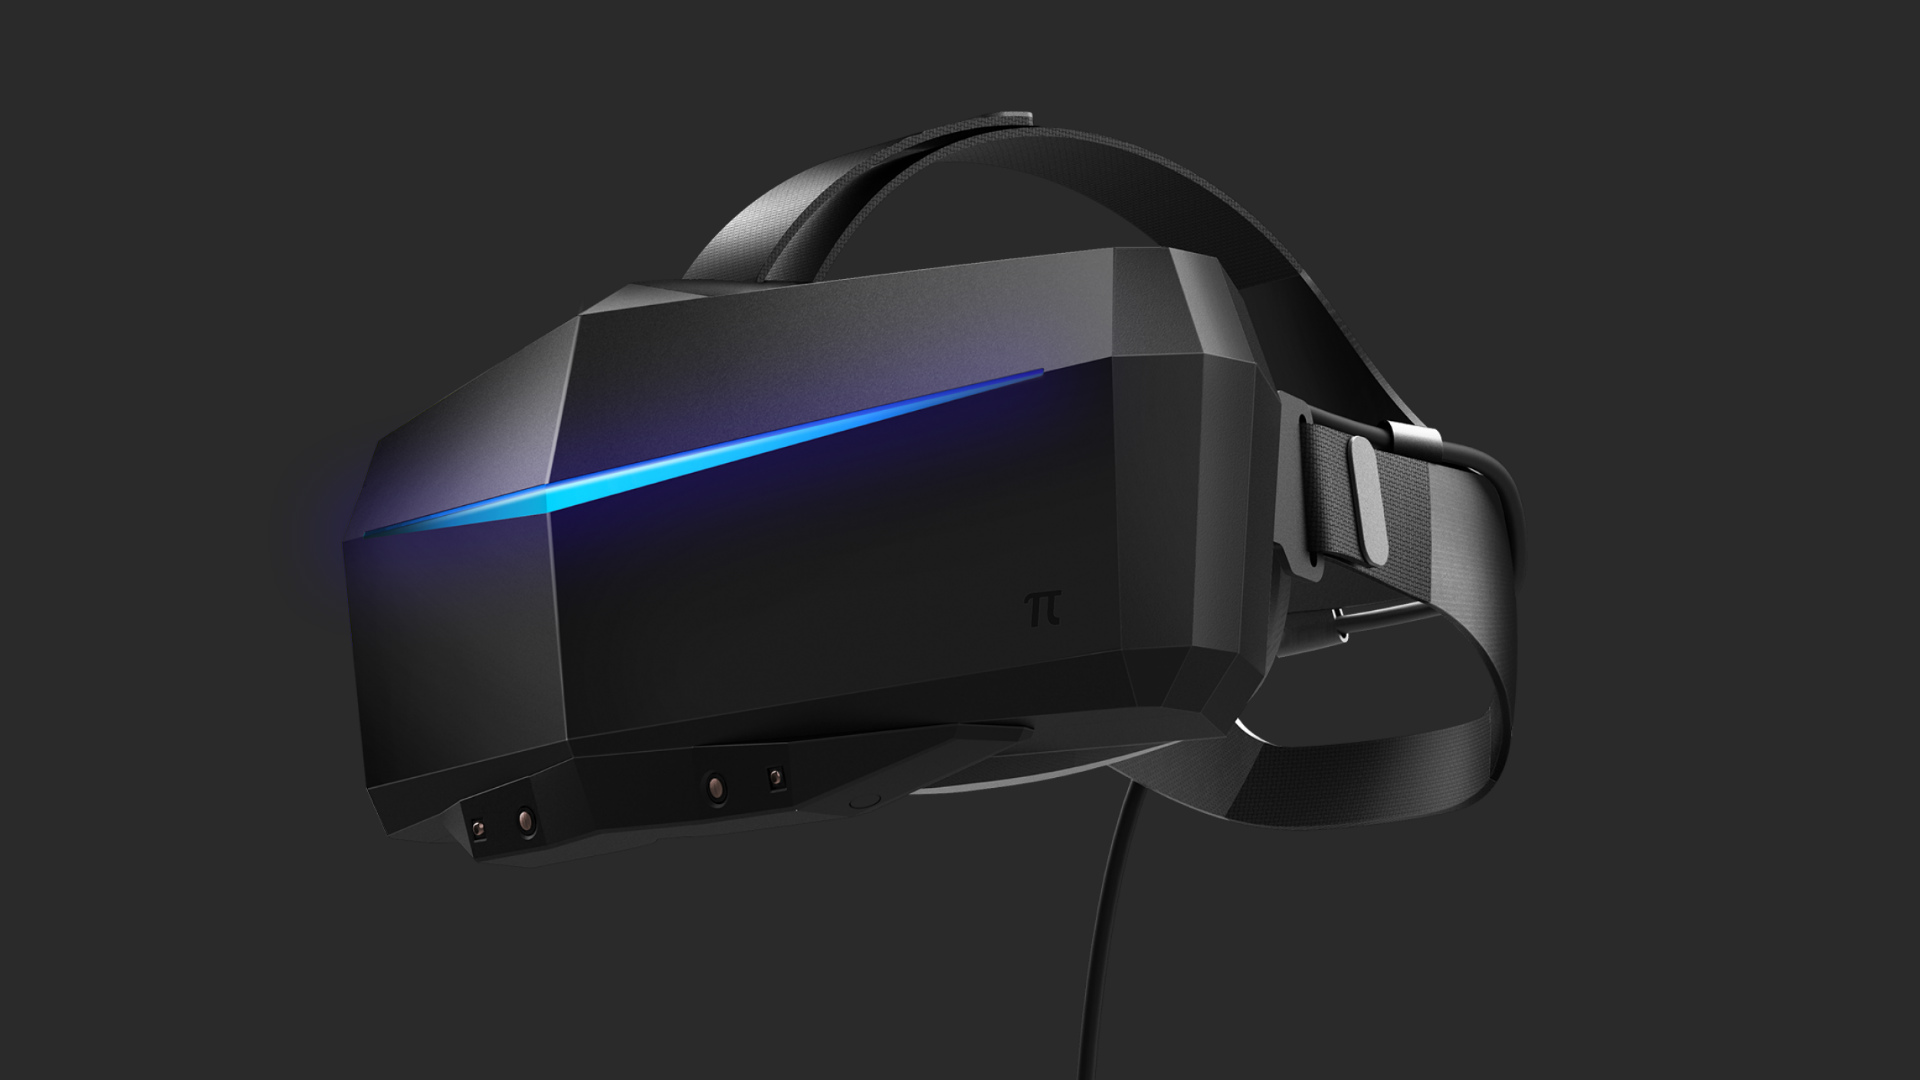 vr headset 2020 upcoming